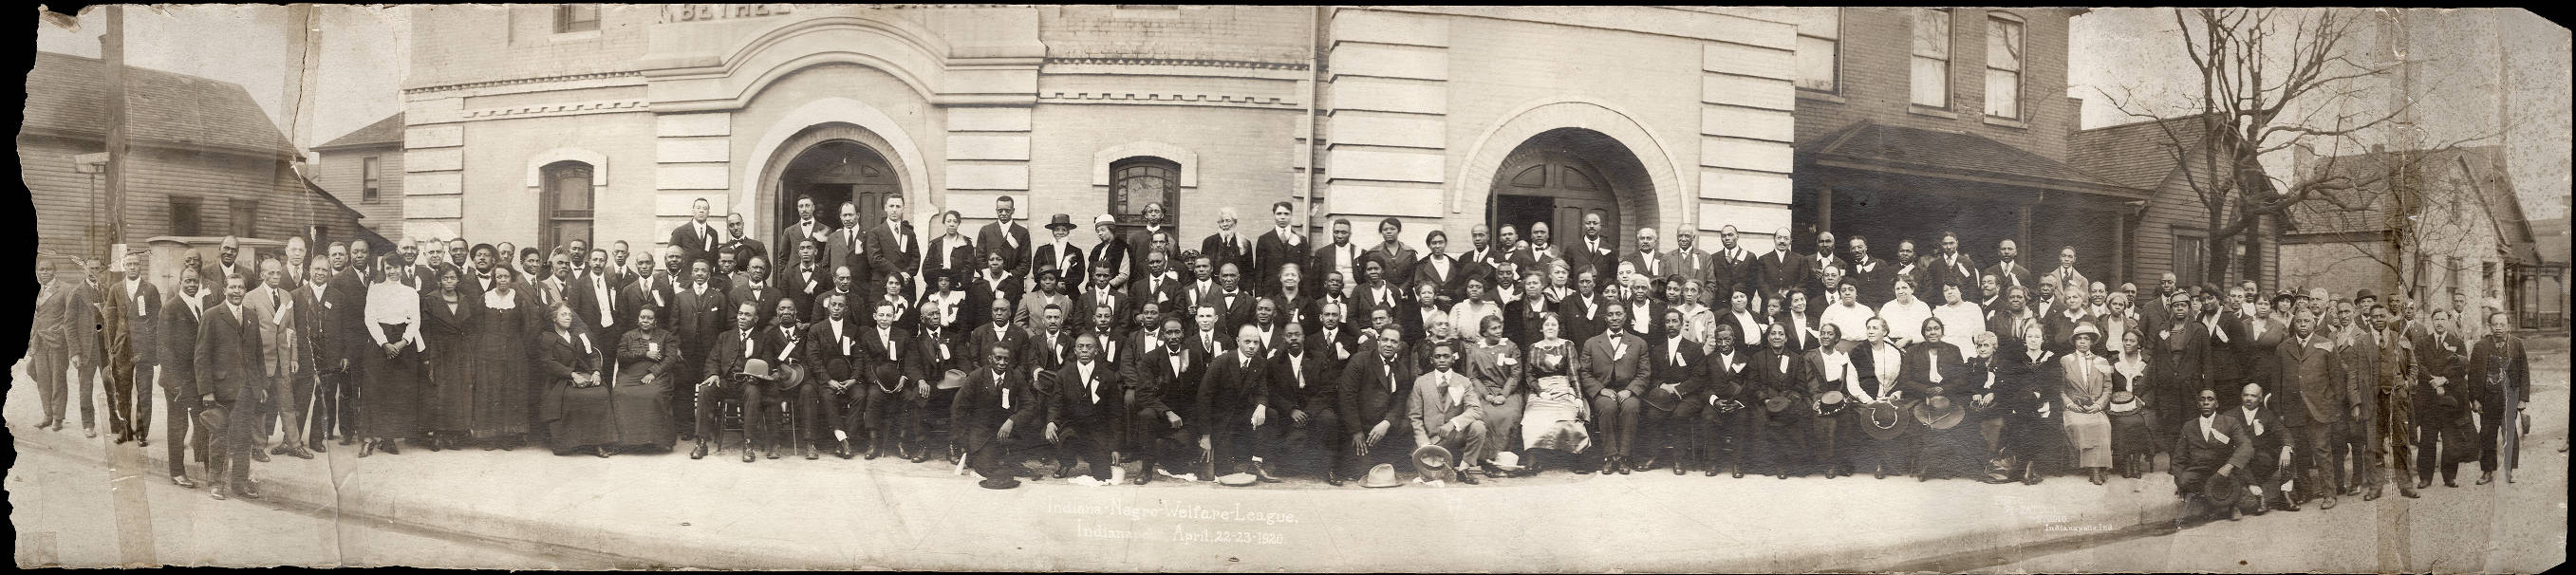 A large group of African American people stand together outside of a building. 